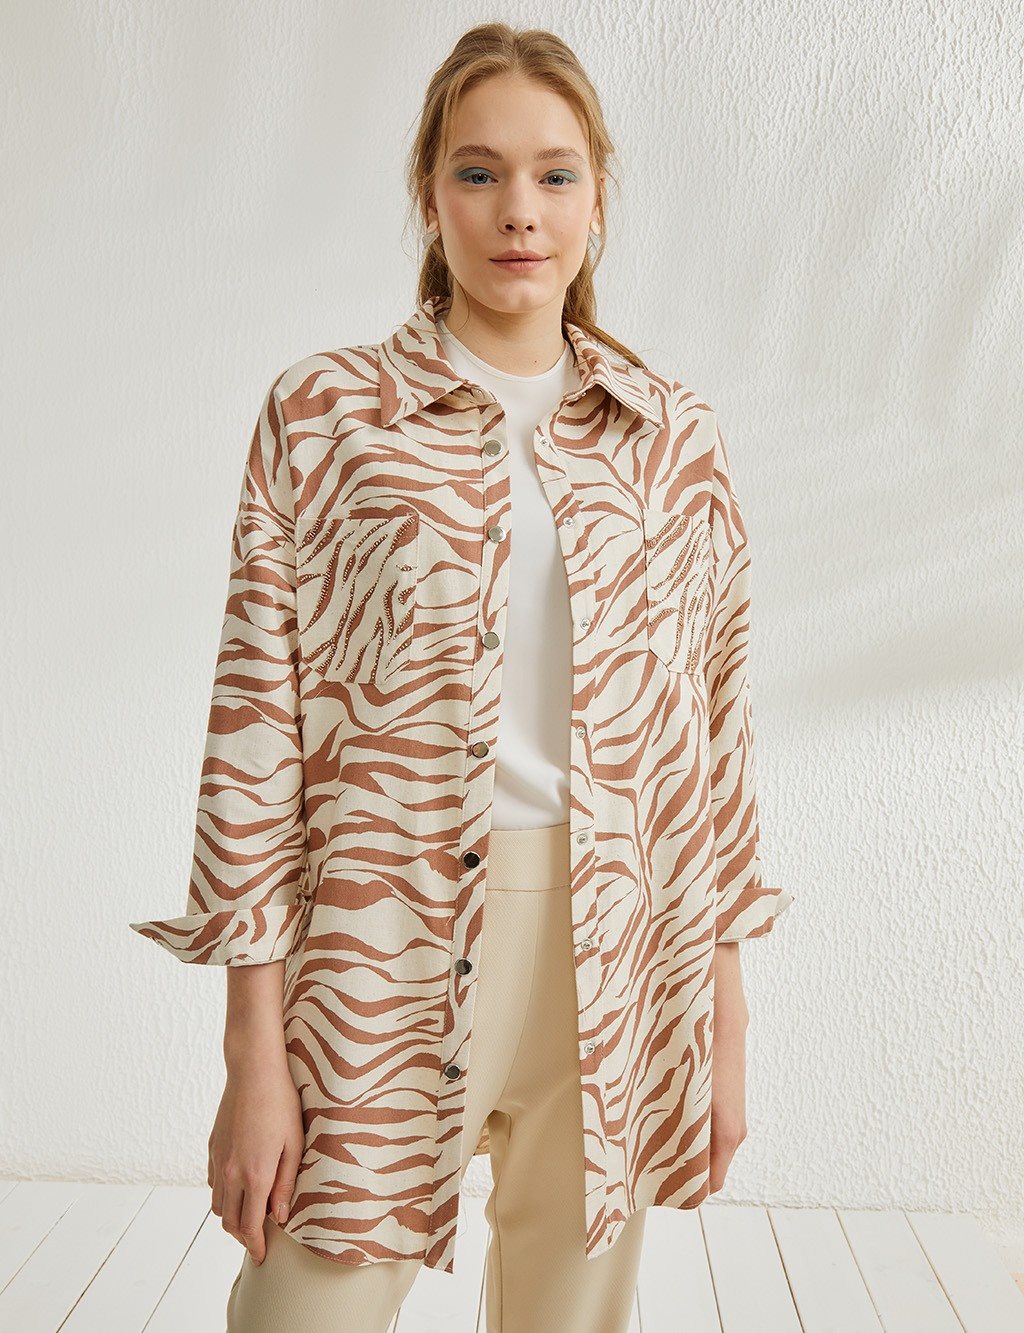 Zebra Patterned Shirt with Metal Buttons Ecru-Brown